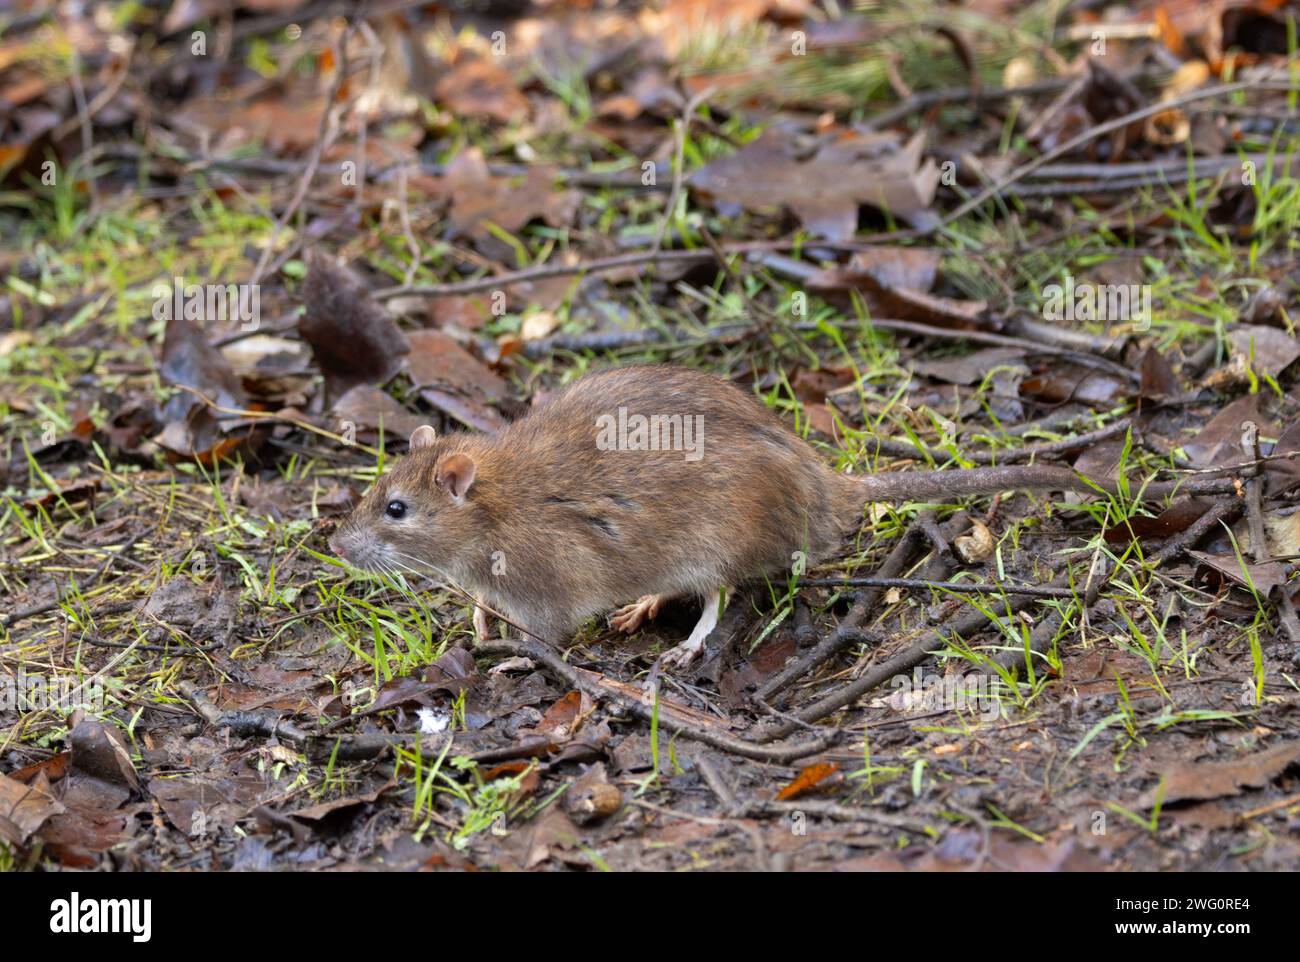 Normally nocturnal, the Brown rat is often seen during the day where people congregate to feed birds and squirrels in Parks and gardens. Stock Photo